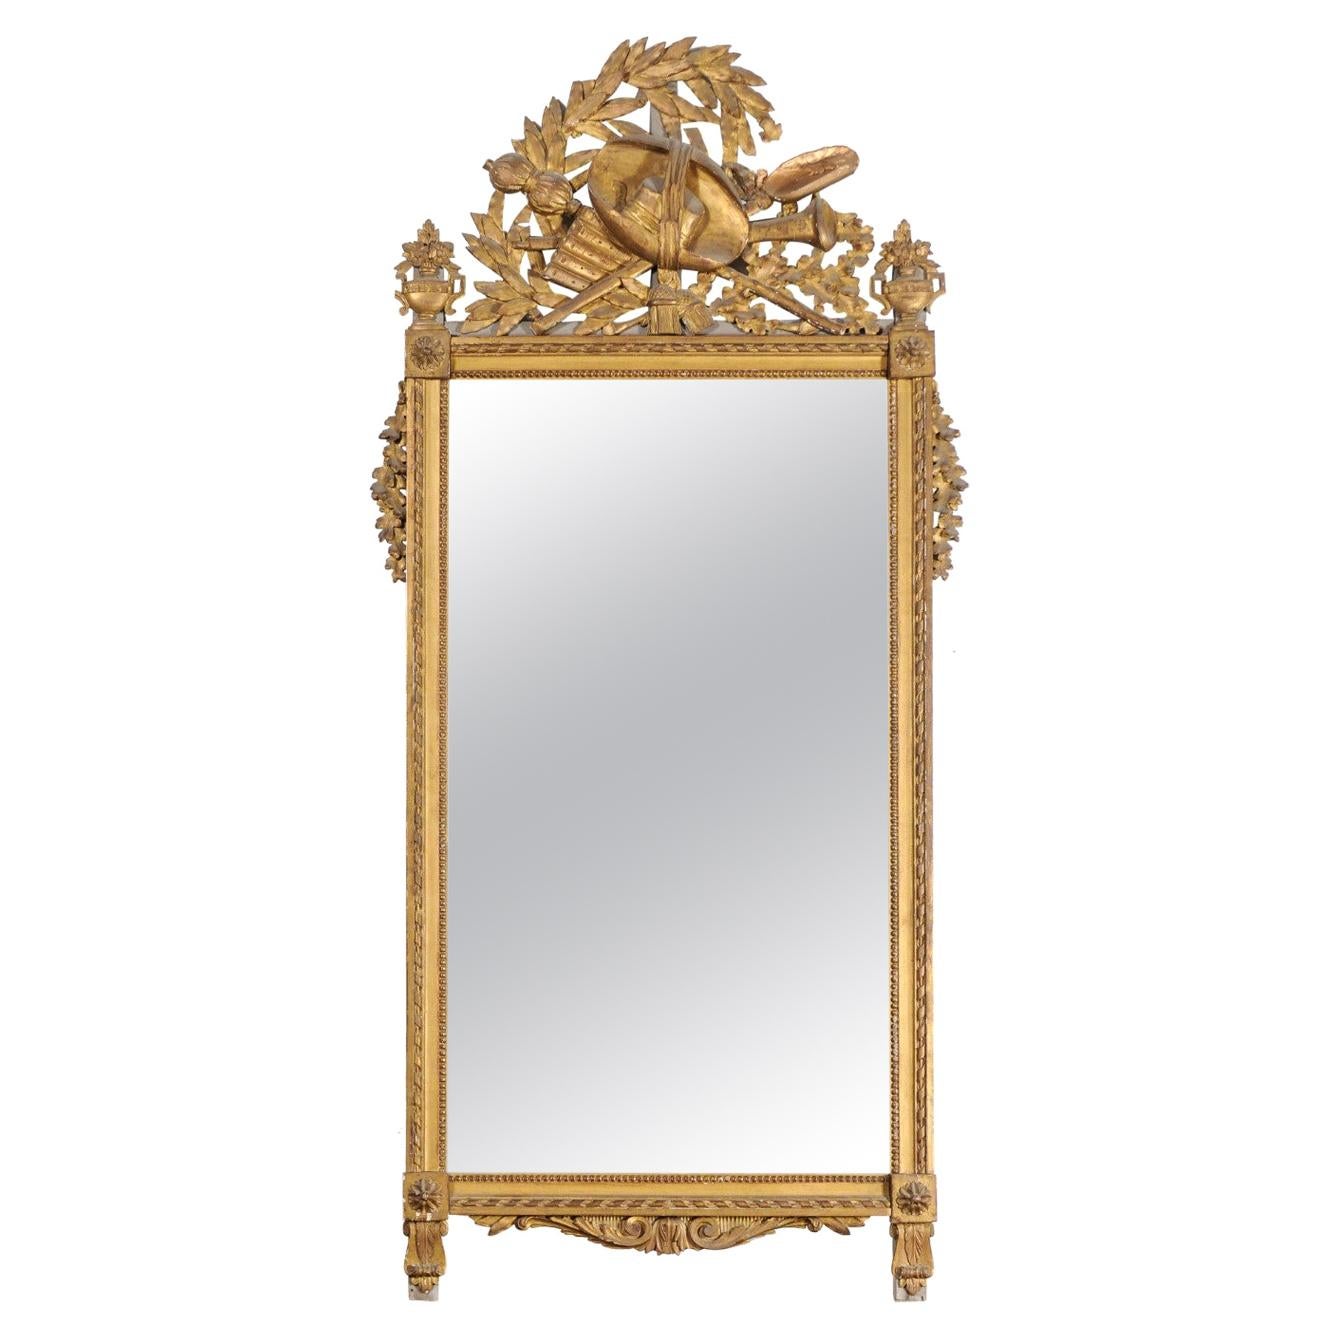 French Late 18th Century Louis XVI Period Giltwood Mirror with Carved Crest For Sale